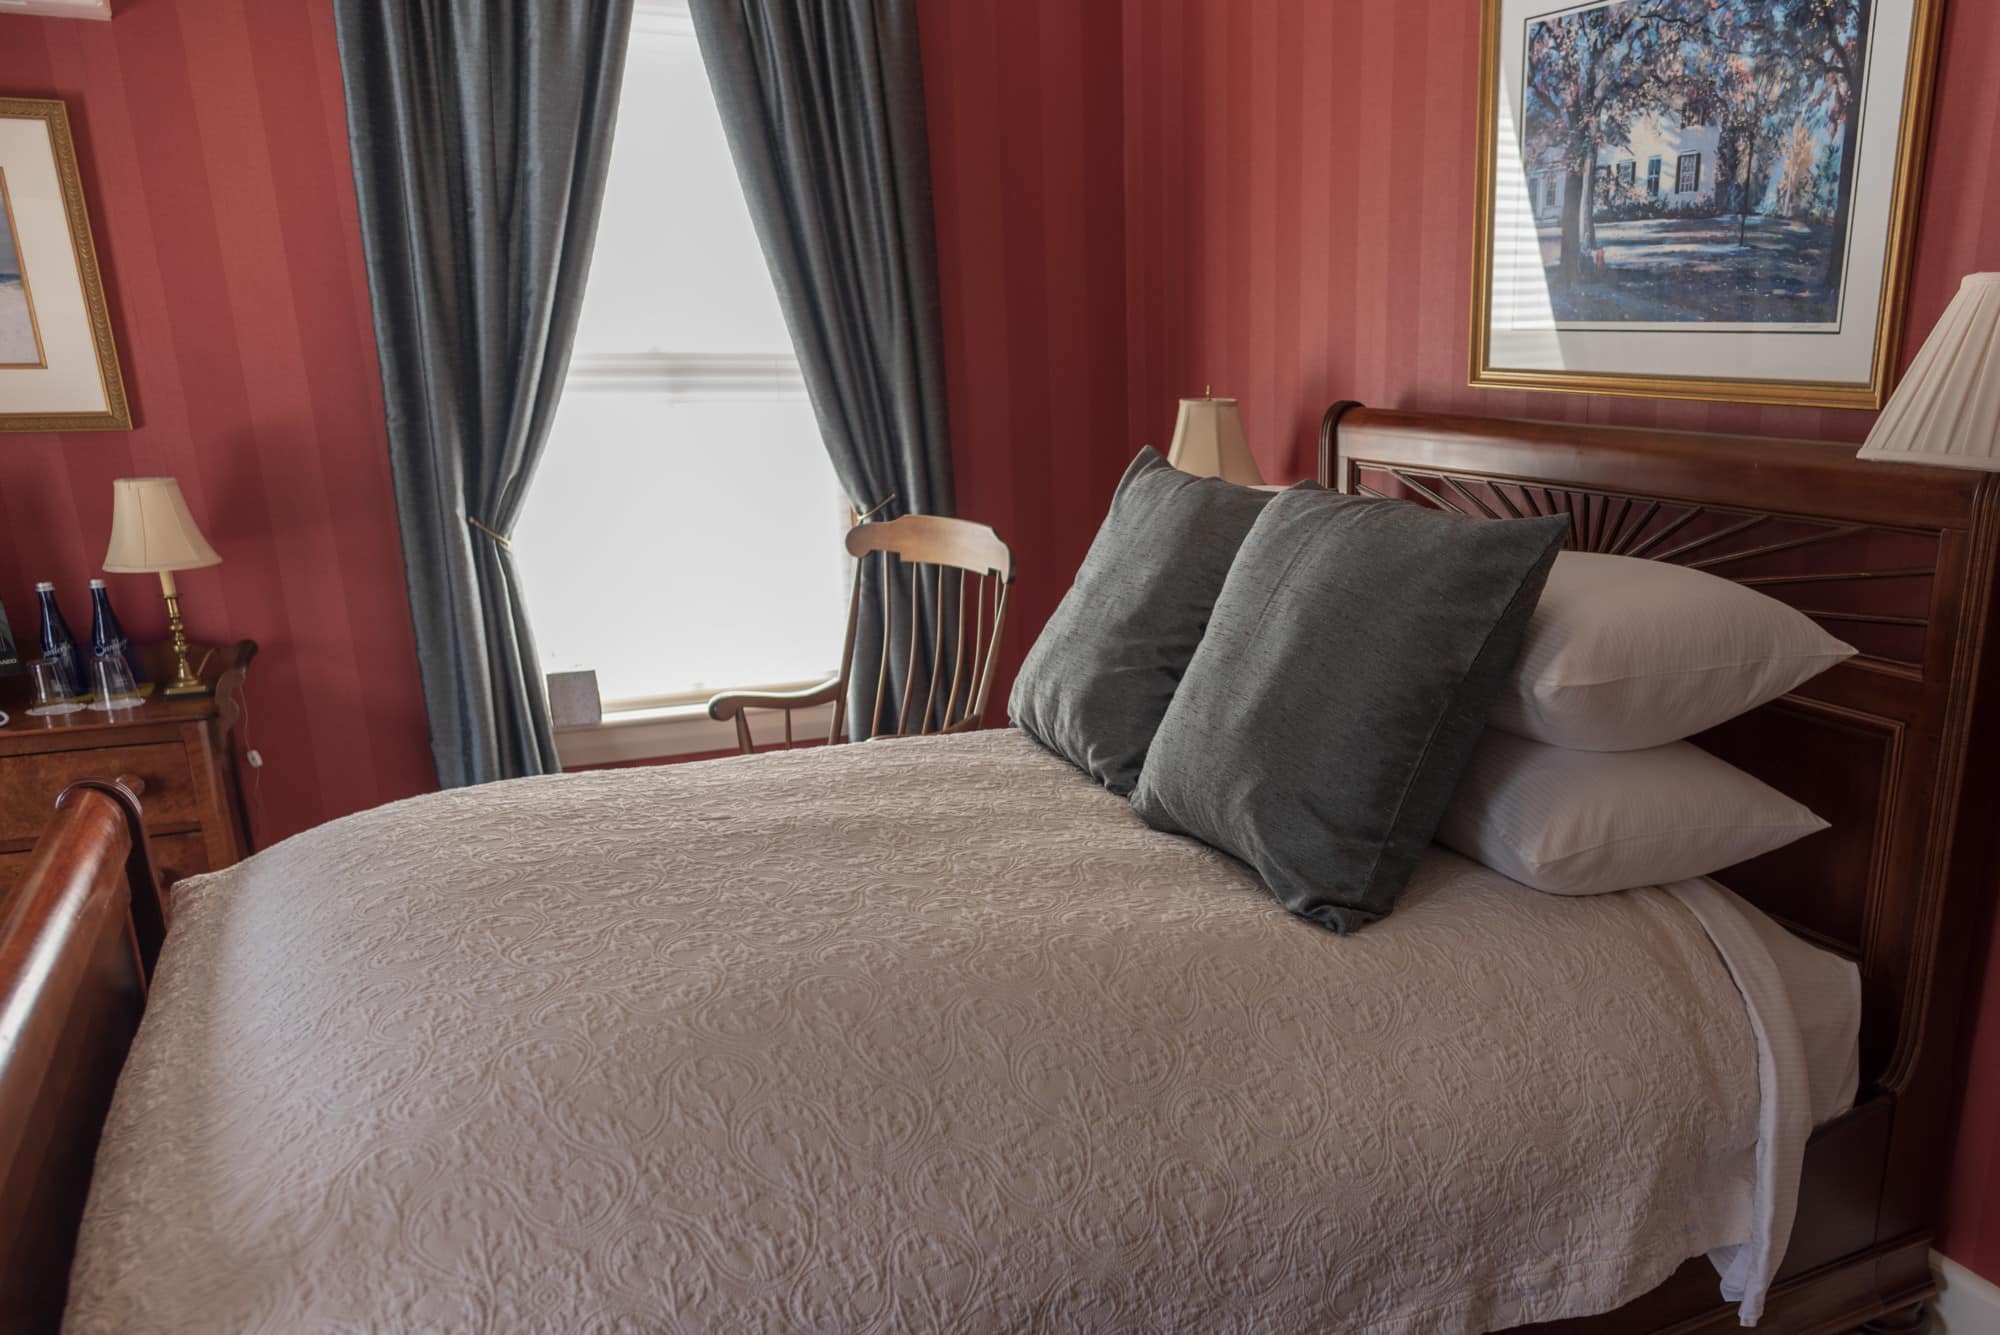 A Beautiful guest room at our Woodstock VT Boutique Hotel, the perfect place for a Vermont Getaway this winter